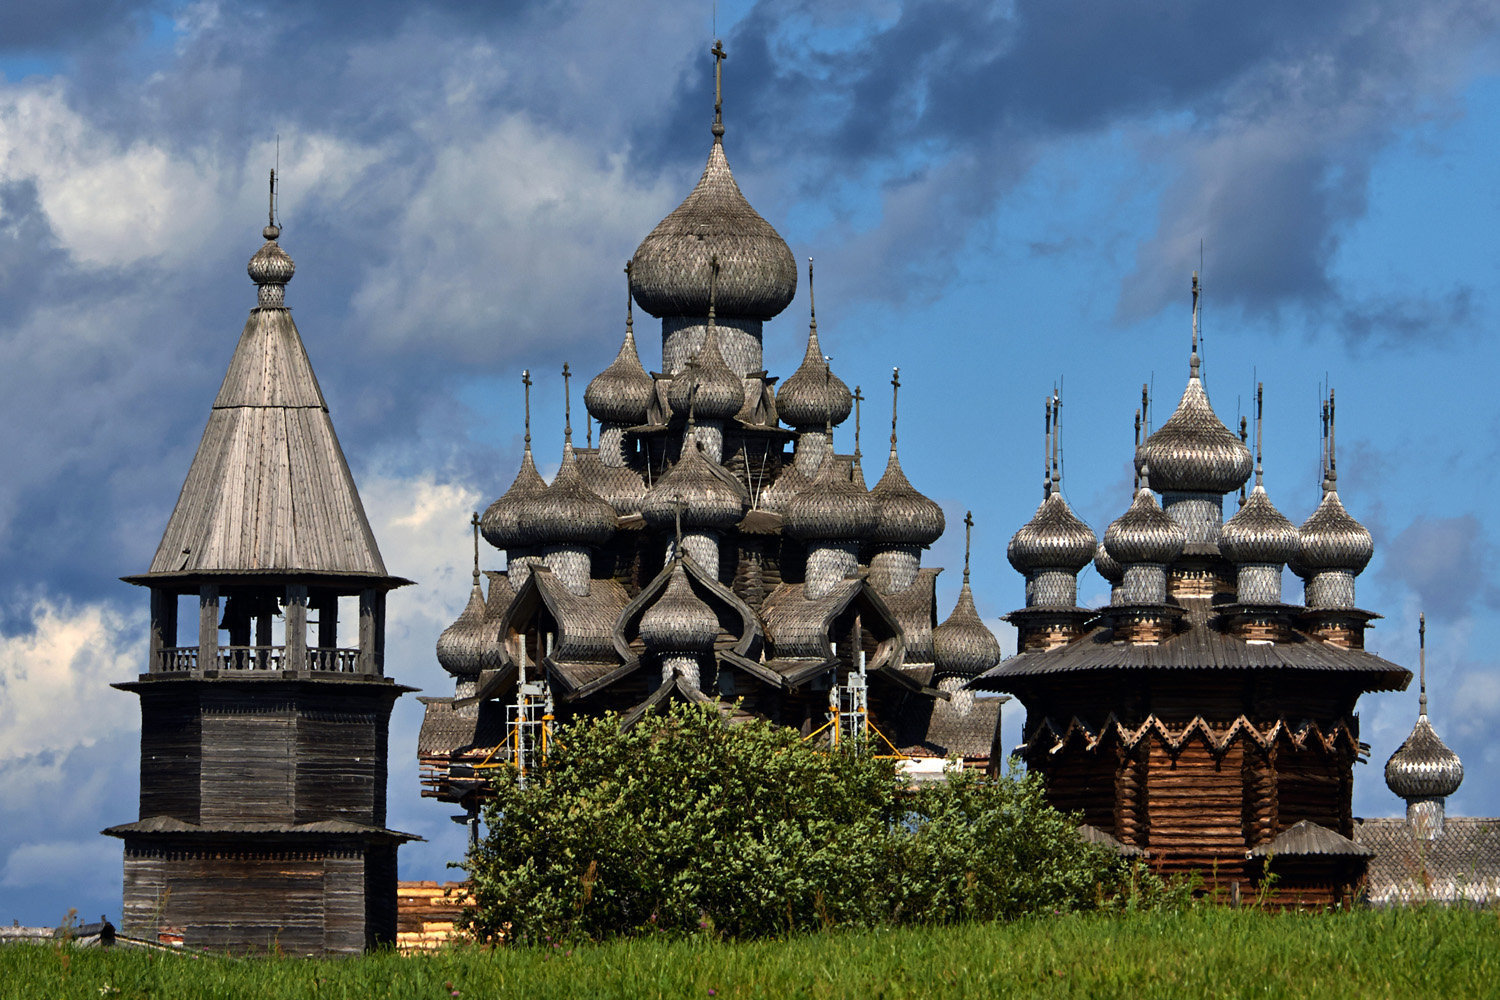 The Kizhi State History, Architecture and Ethnography Museum and Protected Nature Area